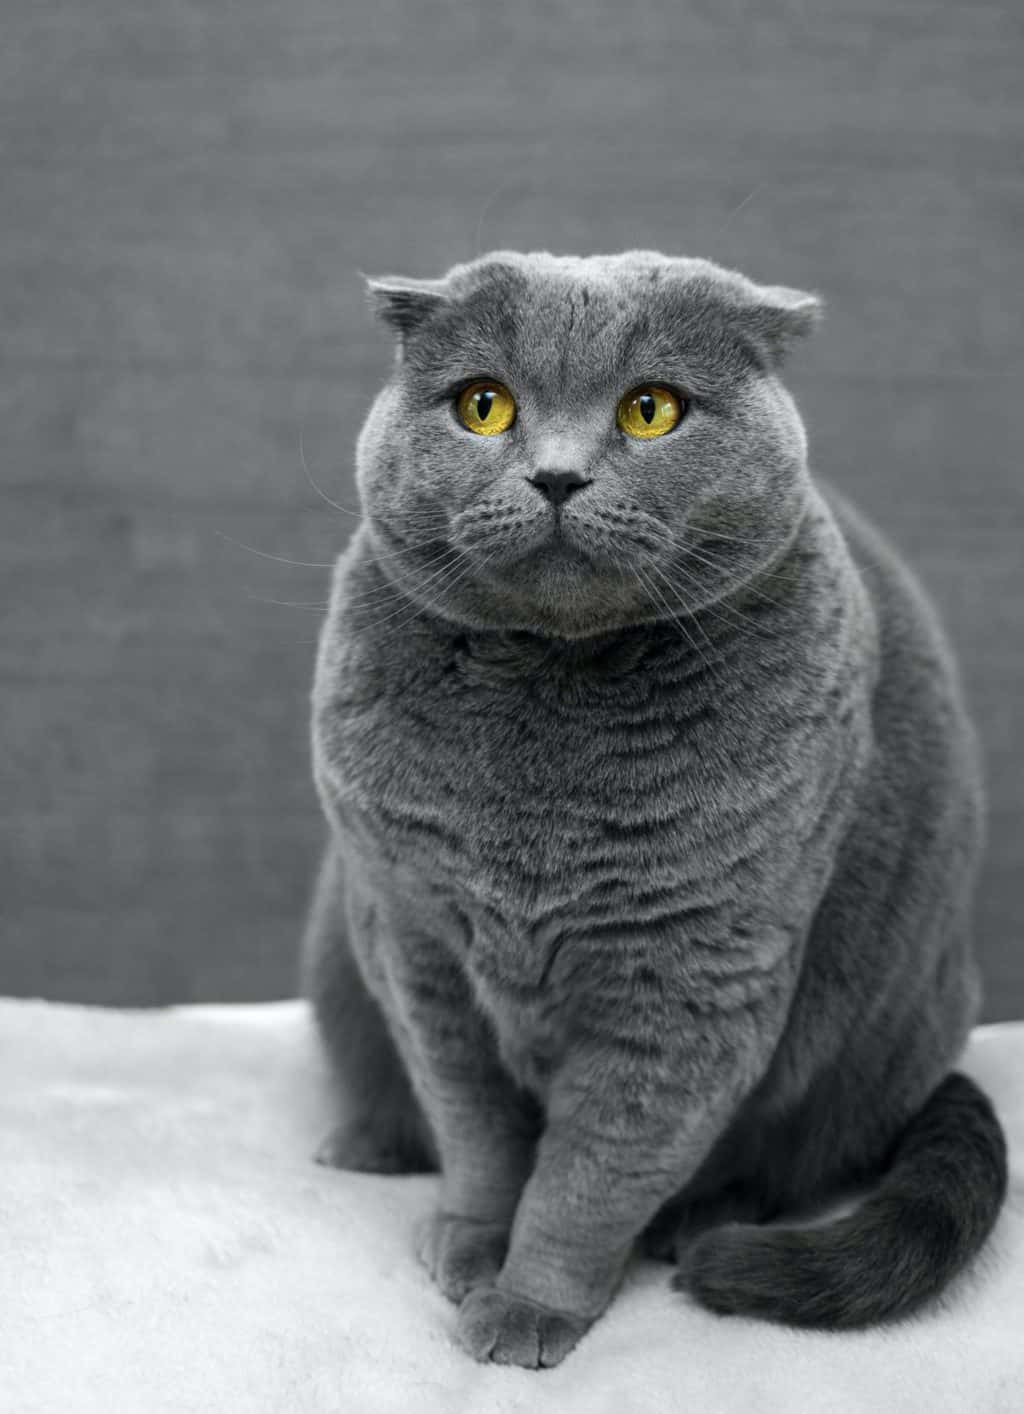 Three Tips to Make an Obese Cat Lose Weight